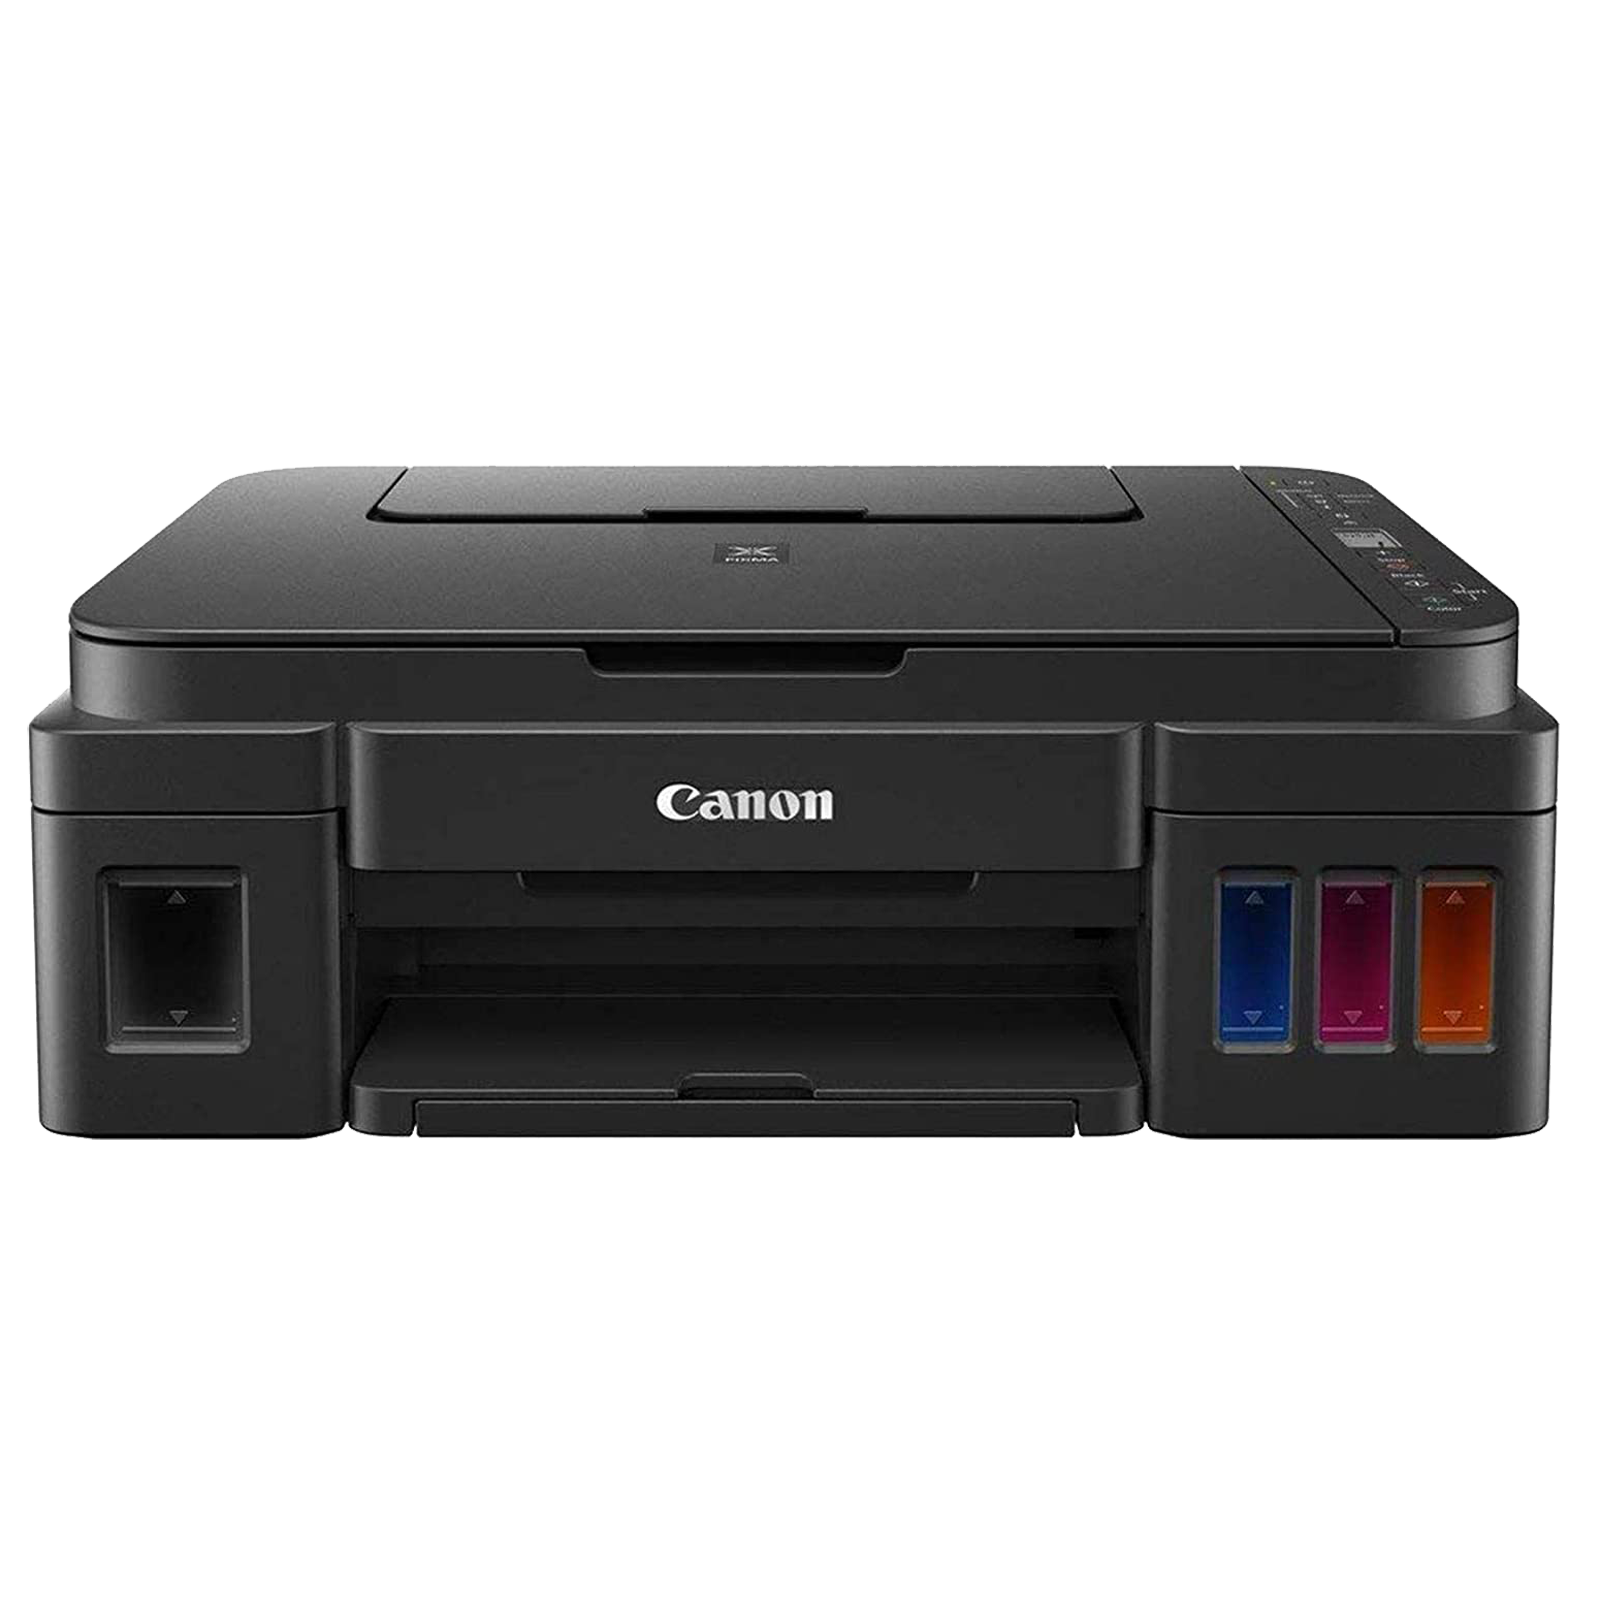 Canon Pixma G3010 All-in-One Ink Tank Printer (Wifi Connectivity, 2315C018AB, Black)